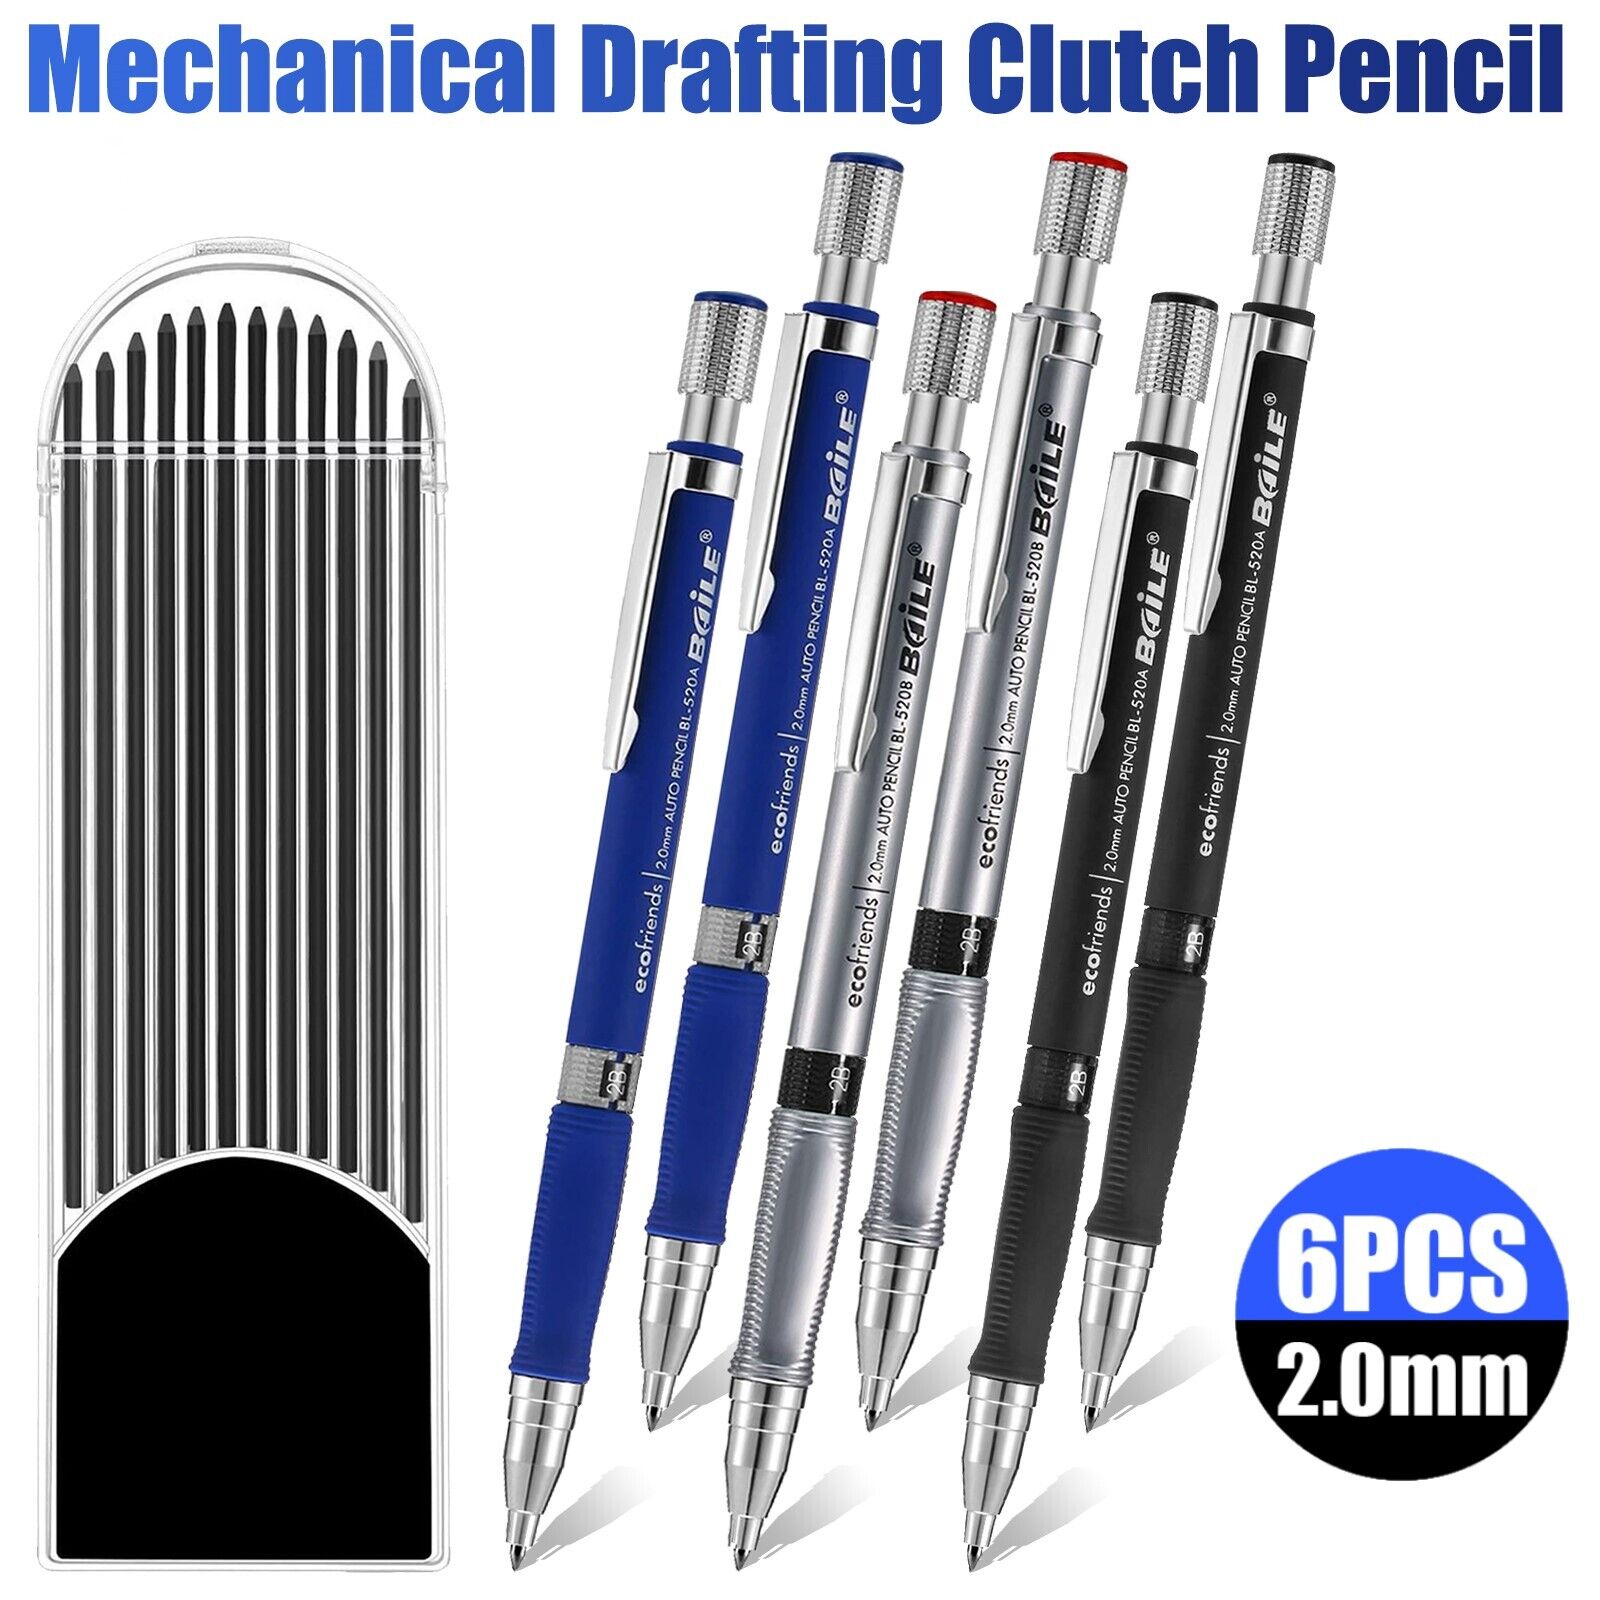 6 Pack 2.0mm Mechanical Pencil W/ 12 Pack 2B Lead Refills for Drawing Sketching